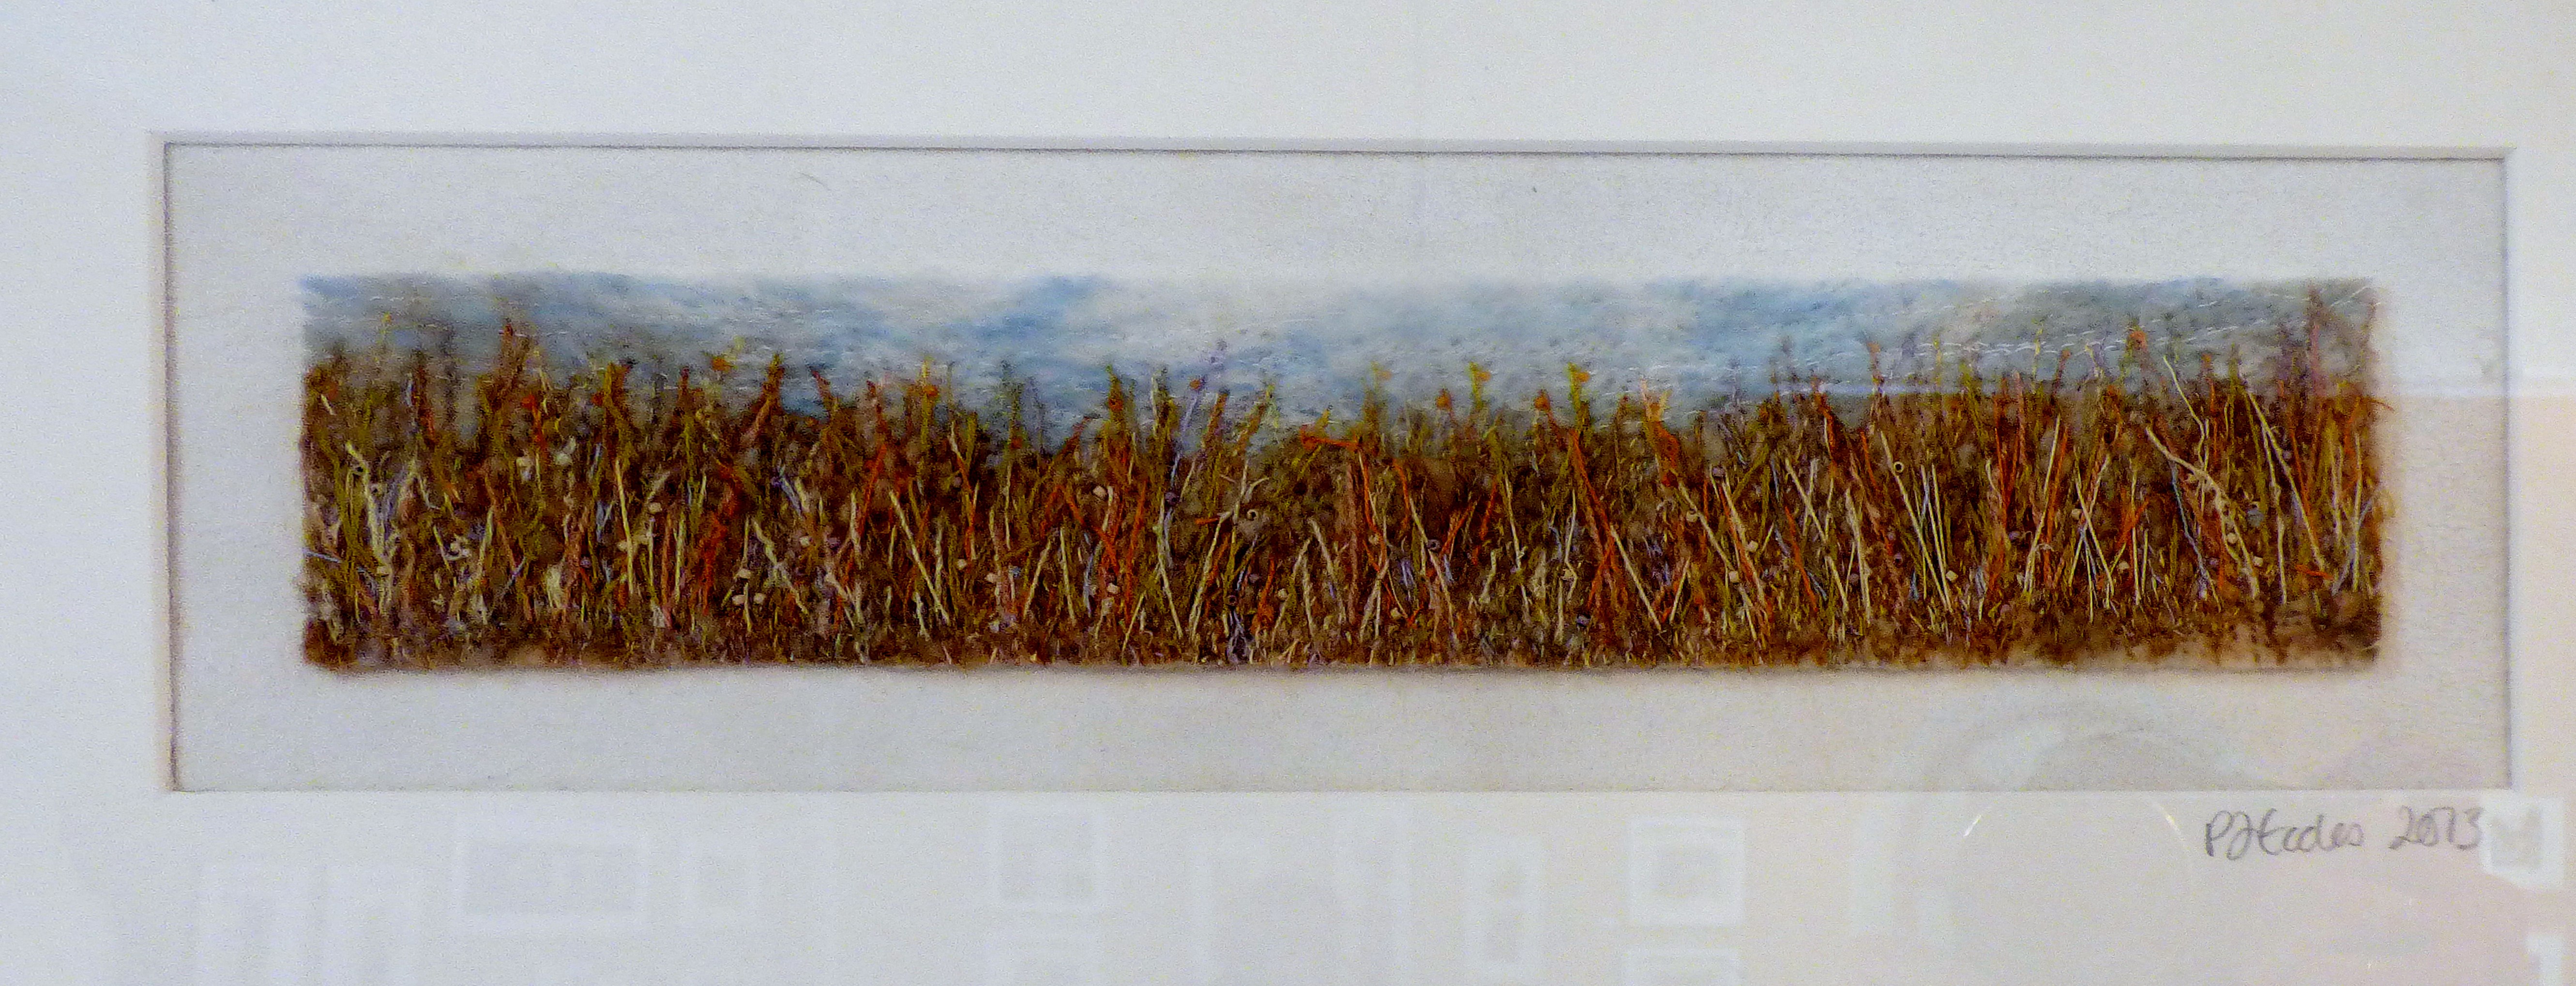 LOCAL FIELDS 1 by Pam Eccles, embellished background with hand stitching and beads, Preston Threads 2016